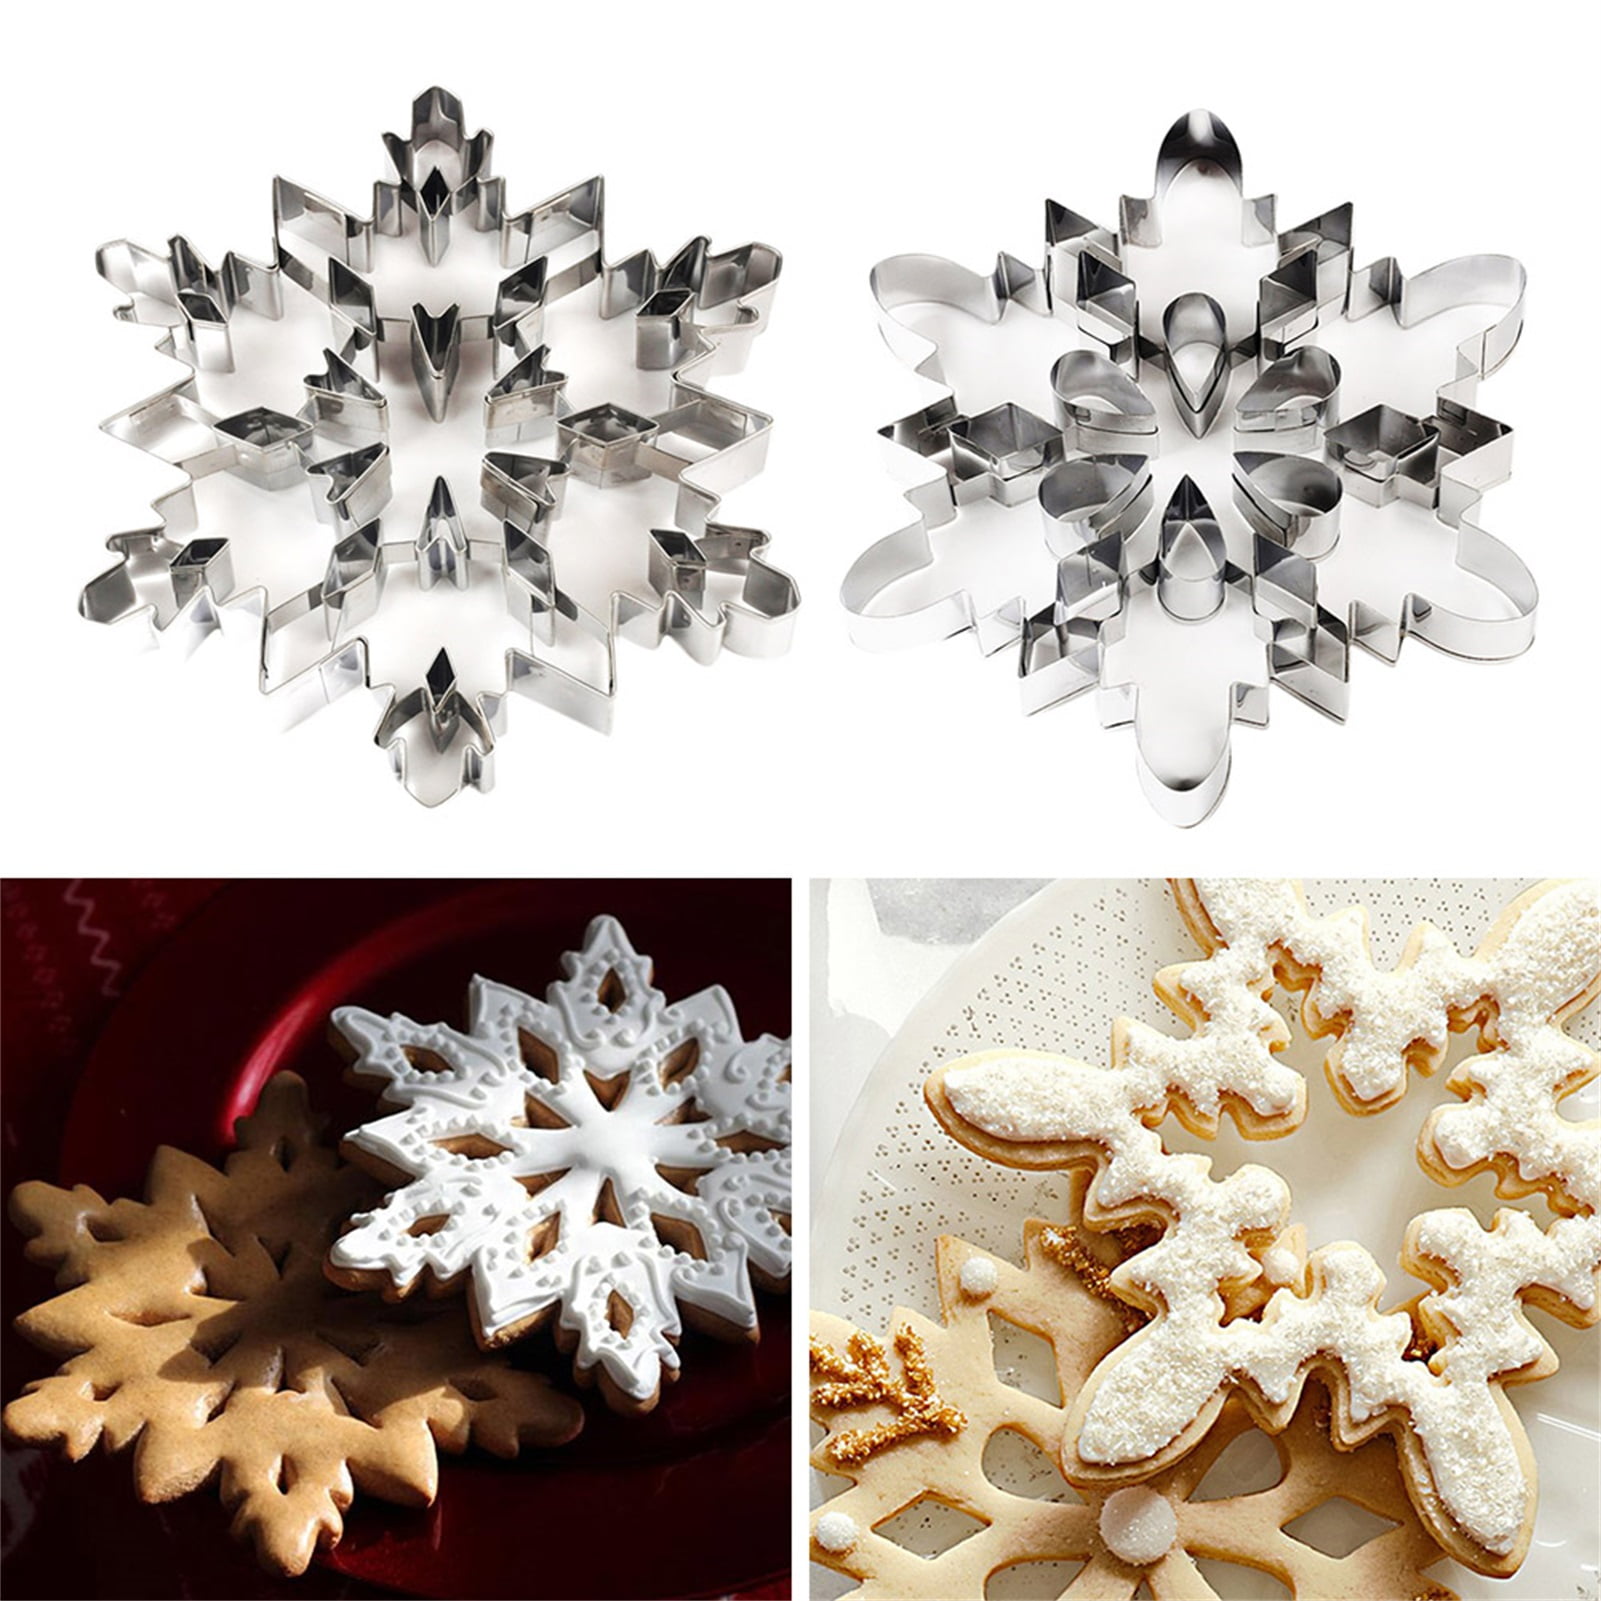 1pc, Snowflake Cake Mold, 3D Silicone Mold, Christmas Pudding Mold, Xmas  Chocolate Mold, For DIY Cake Decorating Tool, Baking Tools, Kitchen  Accessori